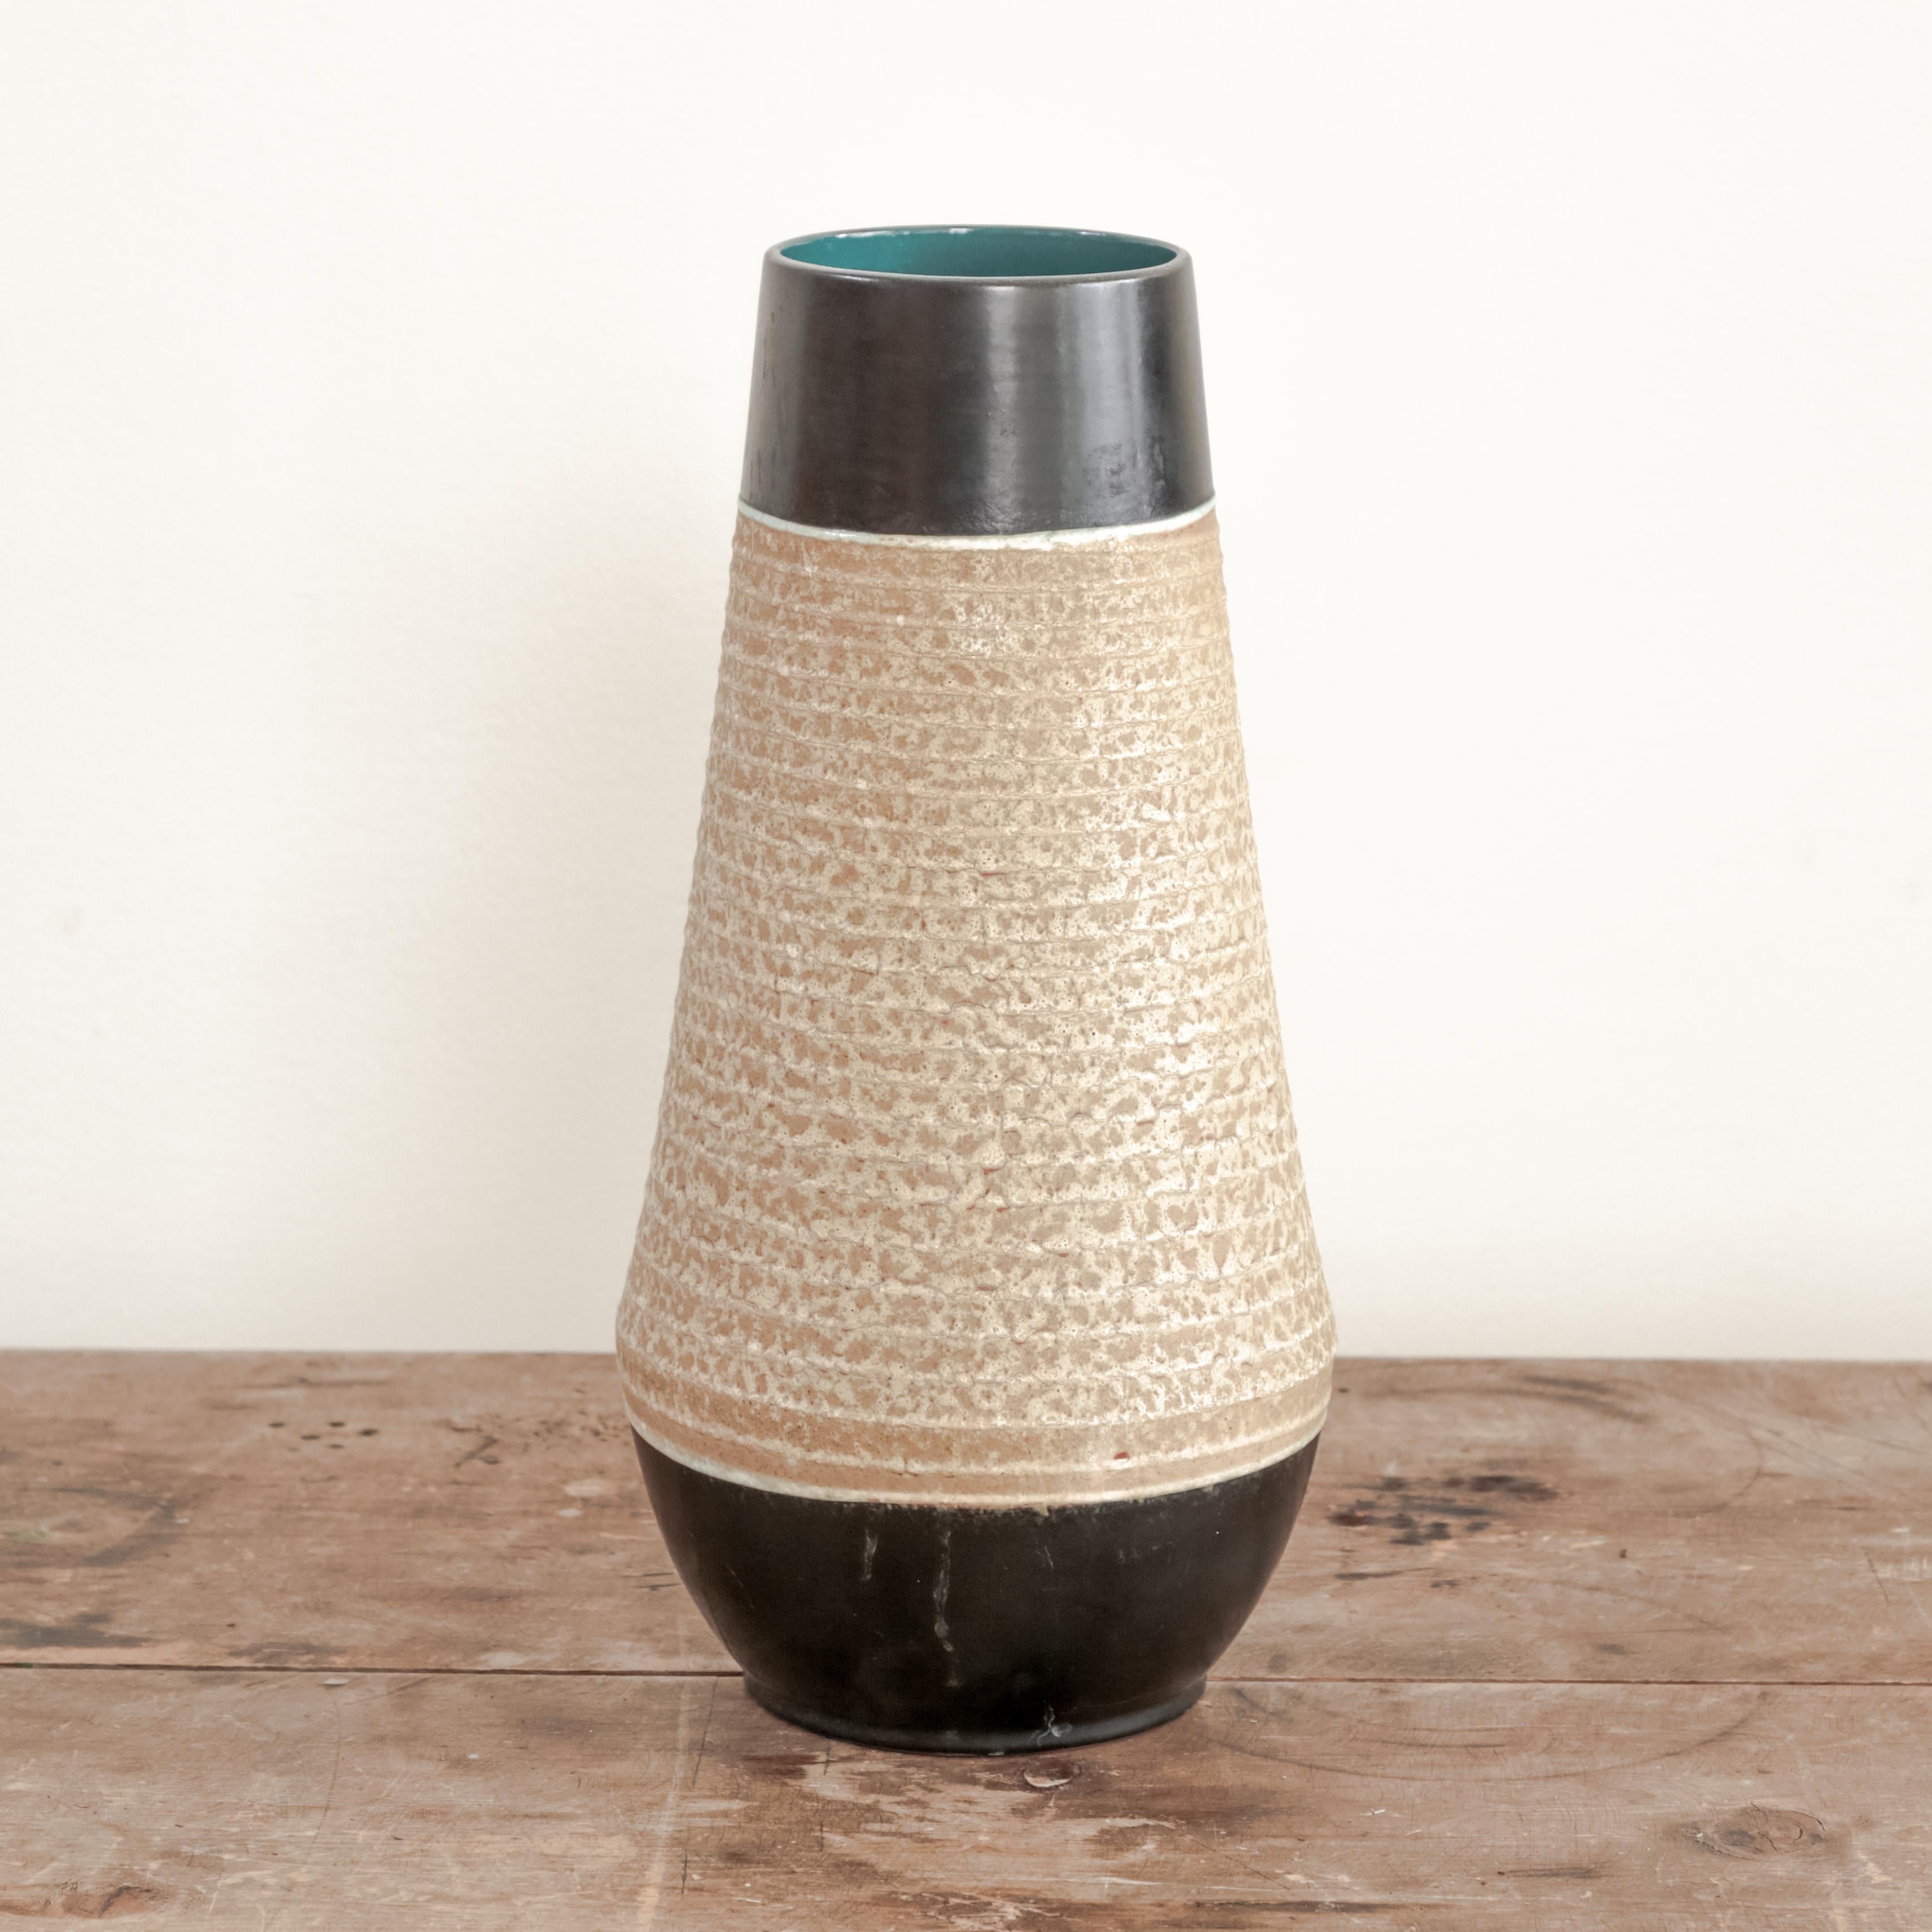 Ceramic vessel 12-32-38 with navy blue glazed ends and ribbed beige body, West Germany circa 1970's. 